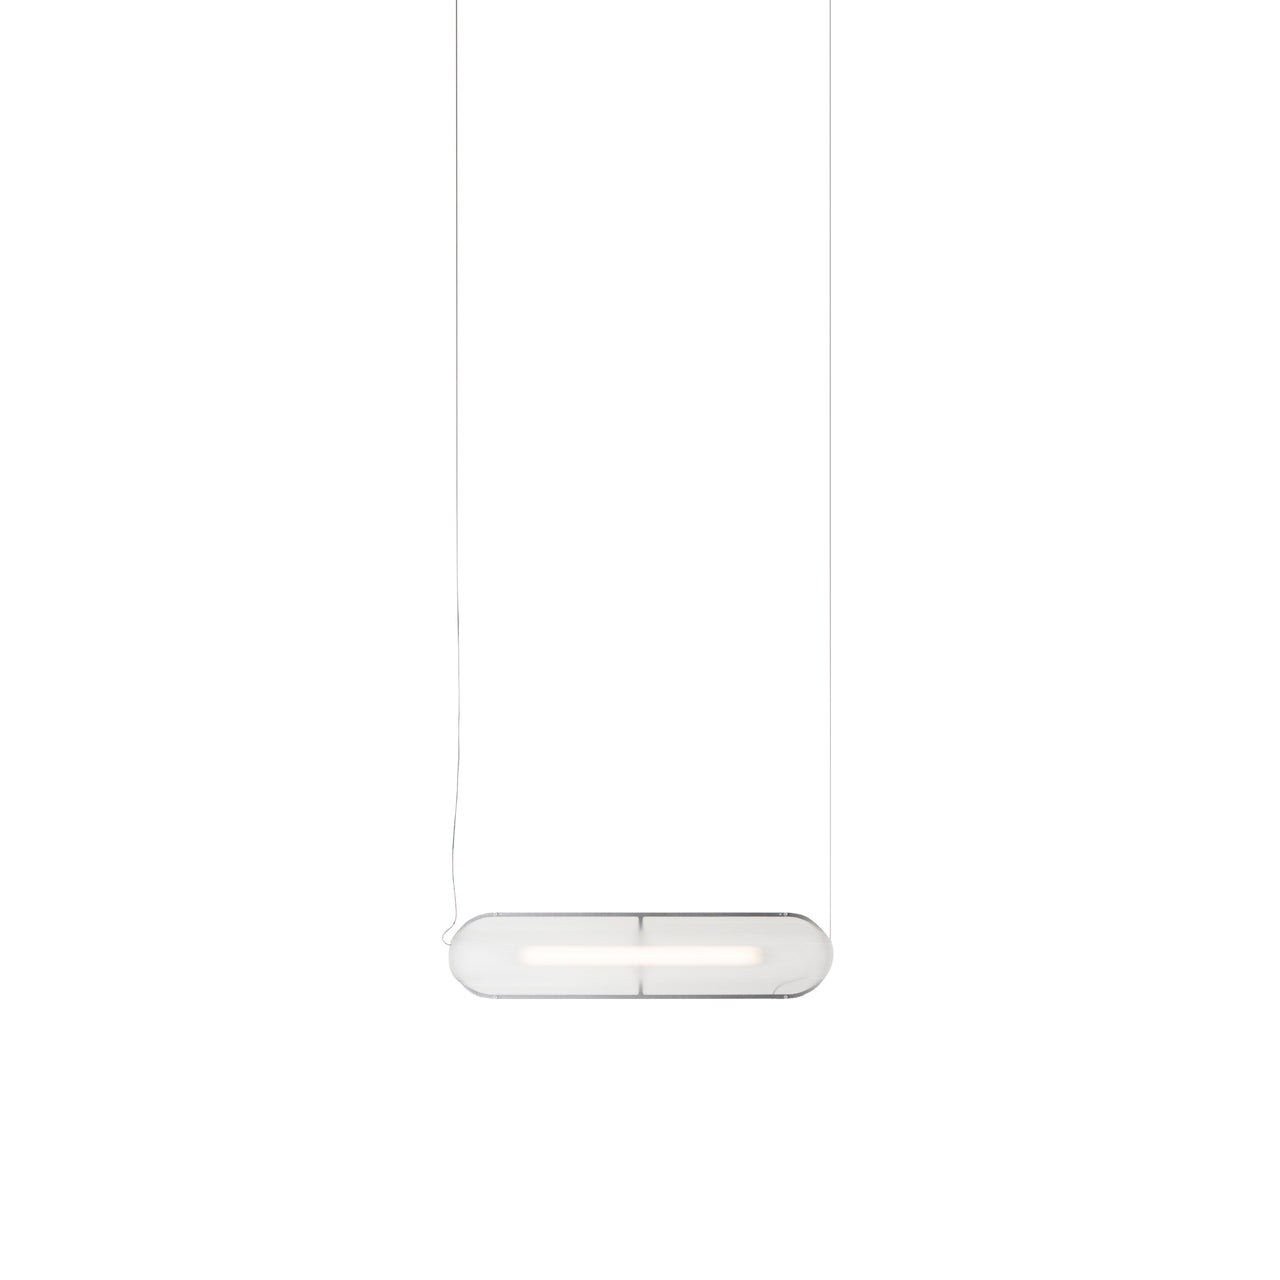 Vale System Y-Axis Pendant Light: Horizontal + End-to-End: Vale 1